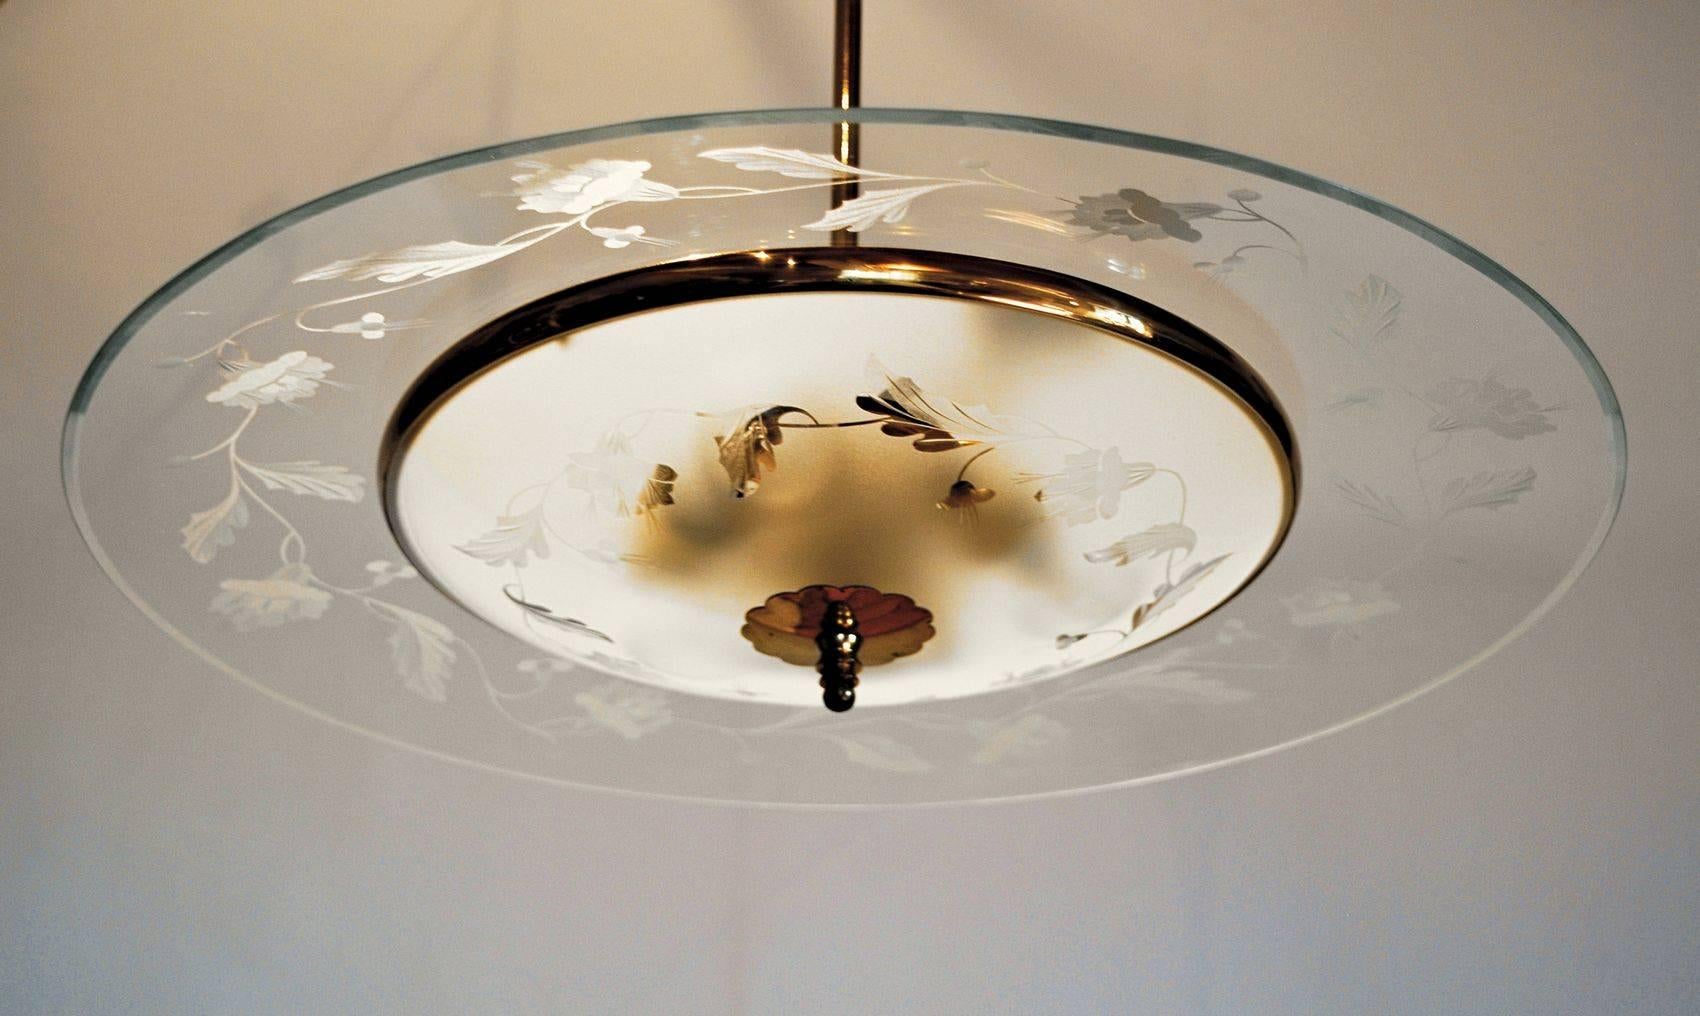 A beautiful chandelier from Fontana Arte. The decoration has hibiscus flowers and it's hand chiselled not etched. The disc covering the bulbs is etched on the background but even here the details are hand chiseled. Hardware is in very good